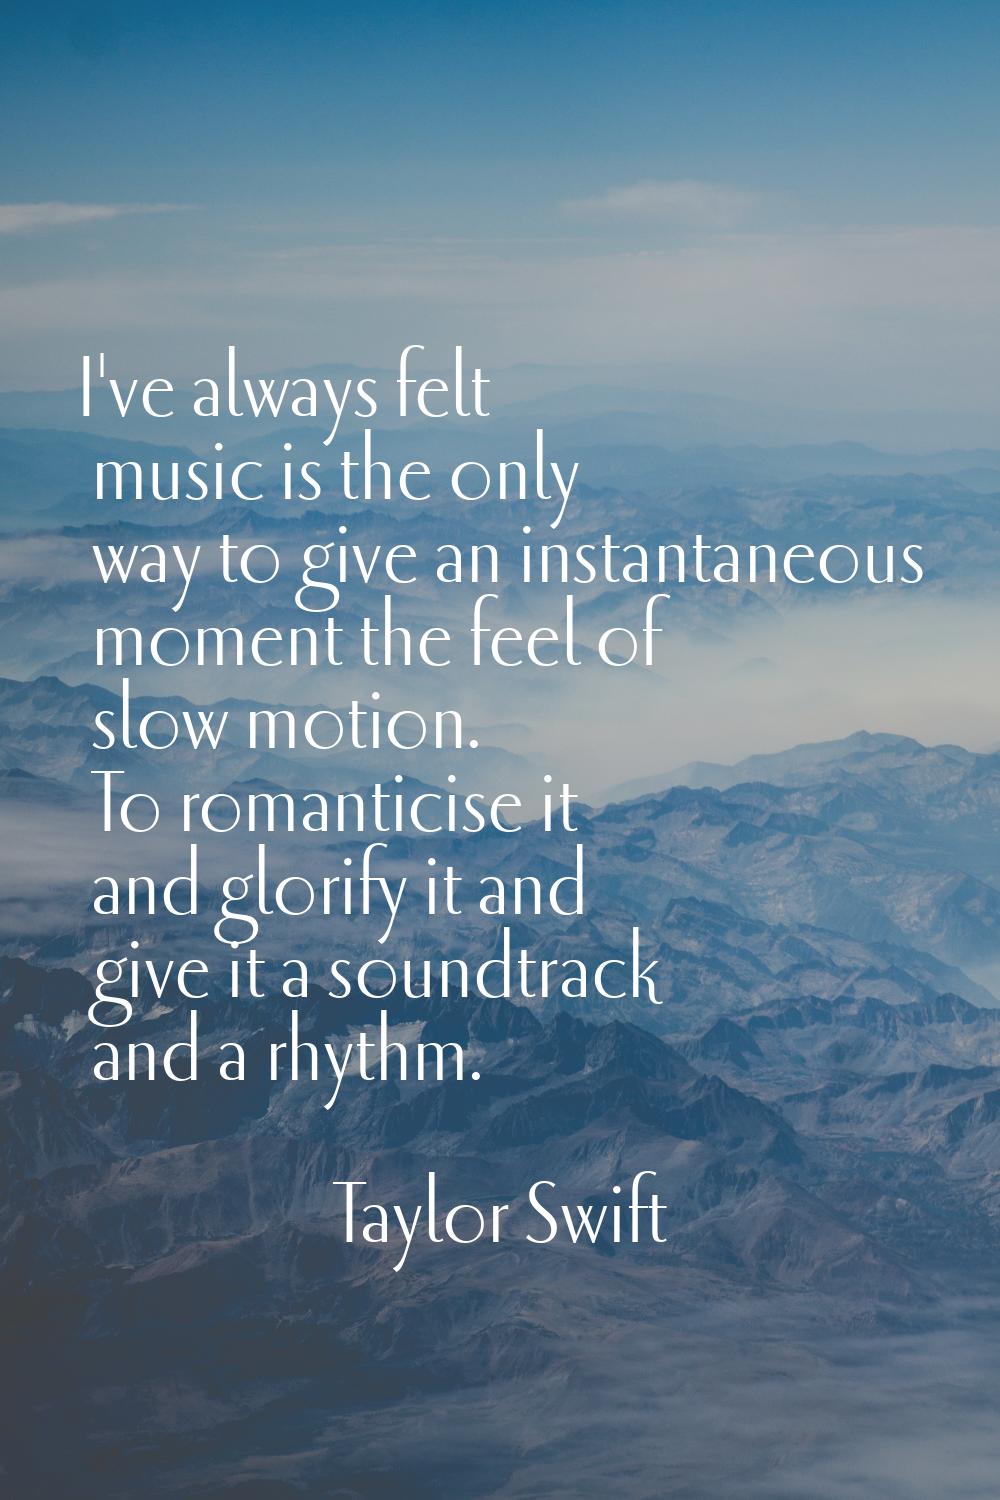 I've always felt music is the only way to give an instantaneous moment the feel of slow motion. To 